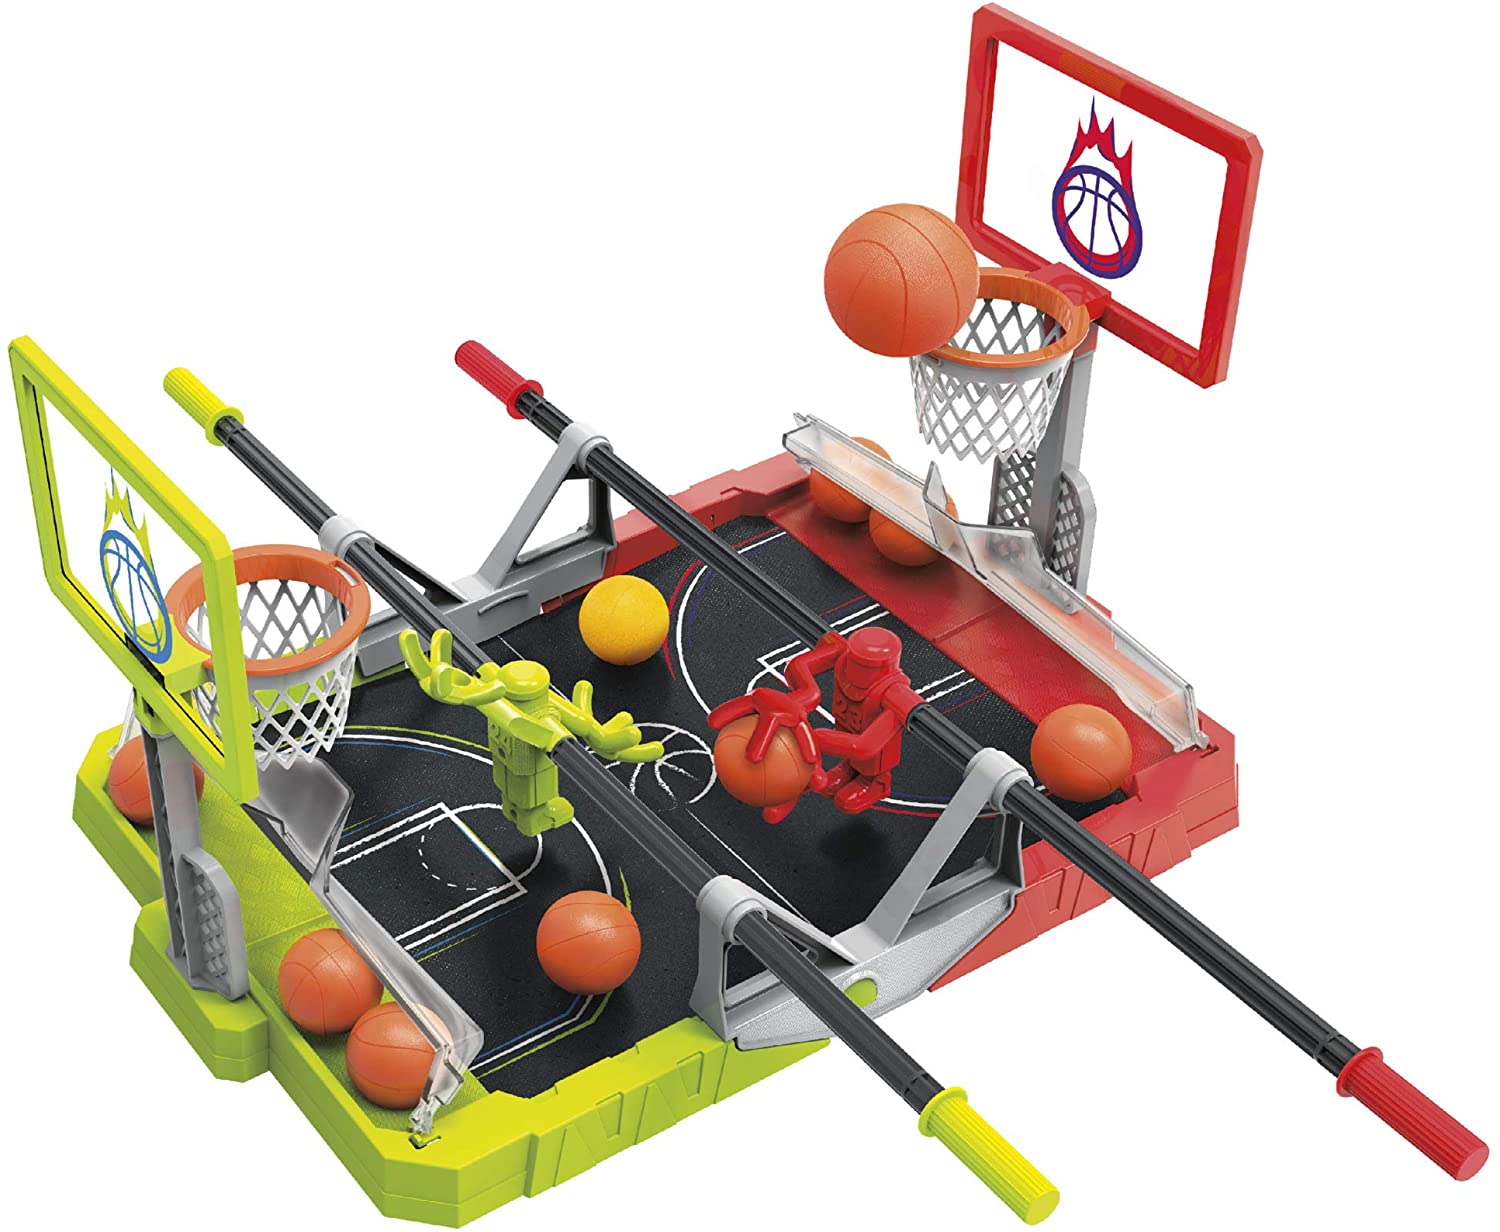 Foosketball Image Playfield and balls 8